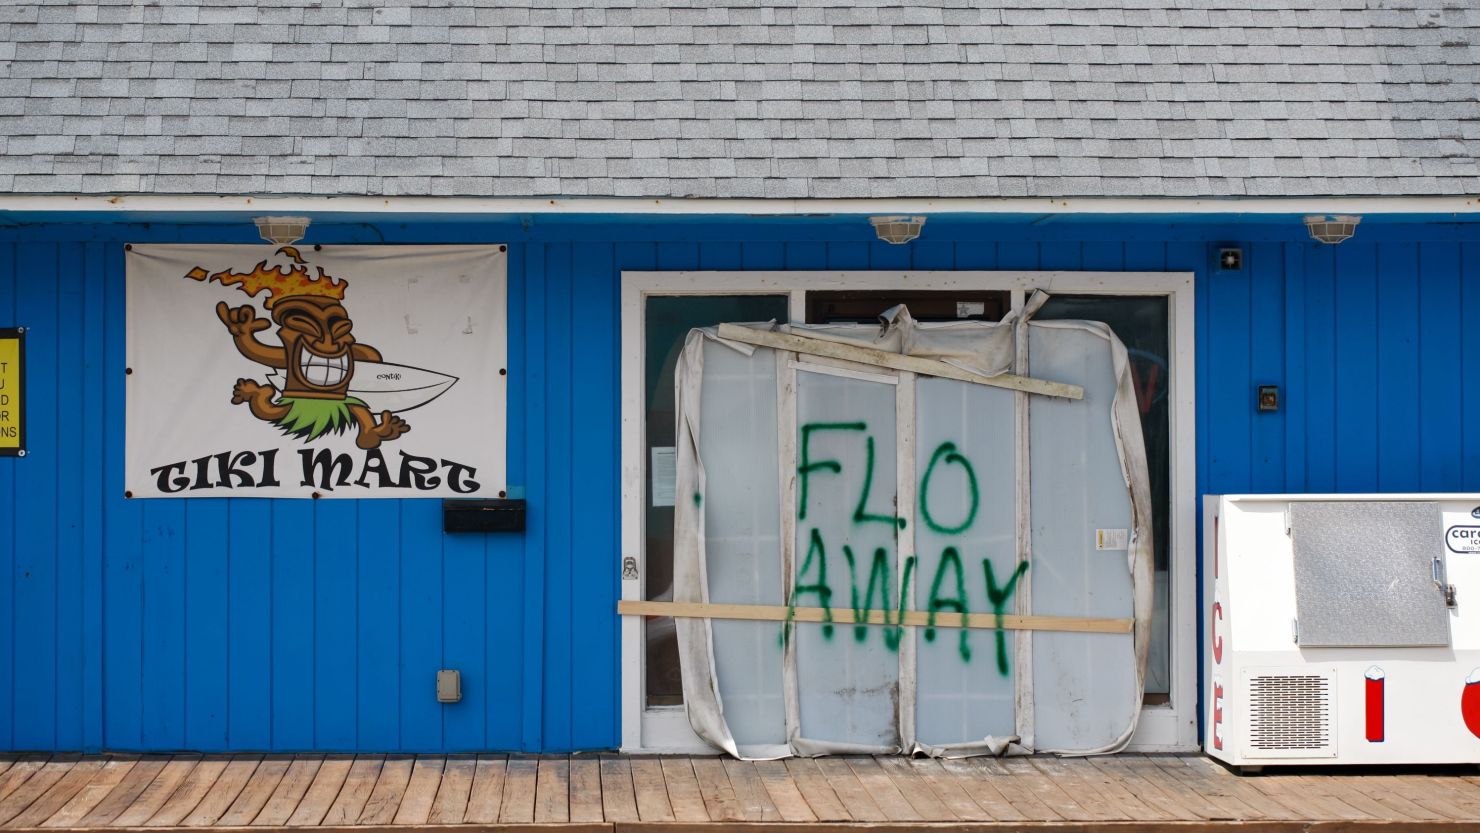 A Tiki bar on Topsail Island, North Carolina sits empty with the message "FLO AWAY" on its door.